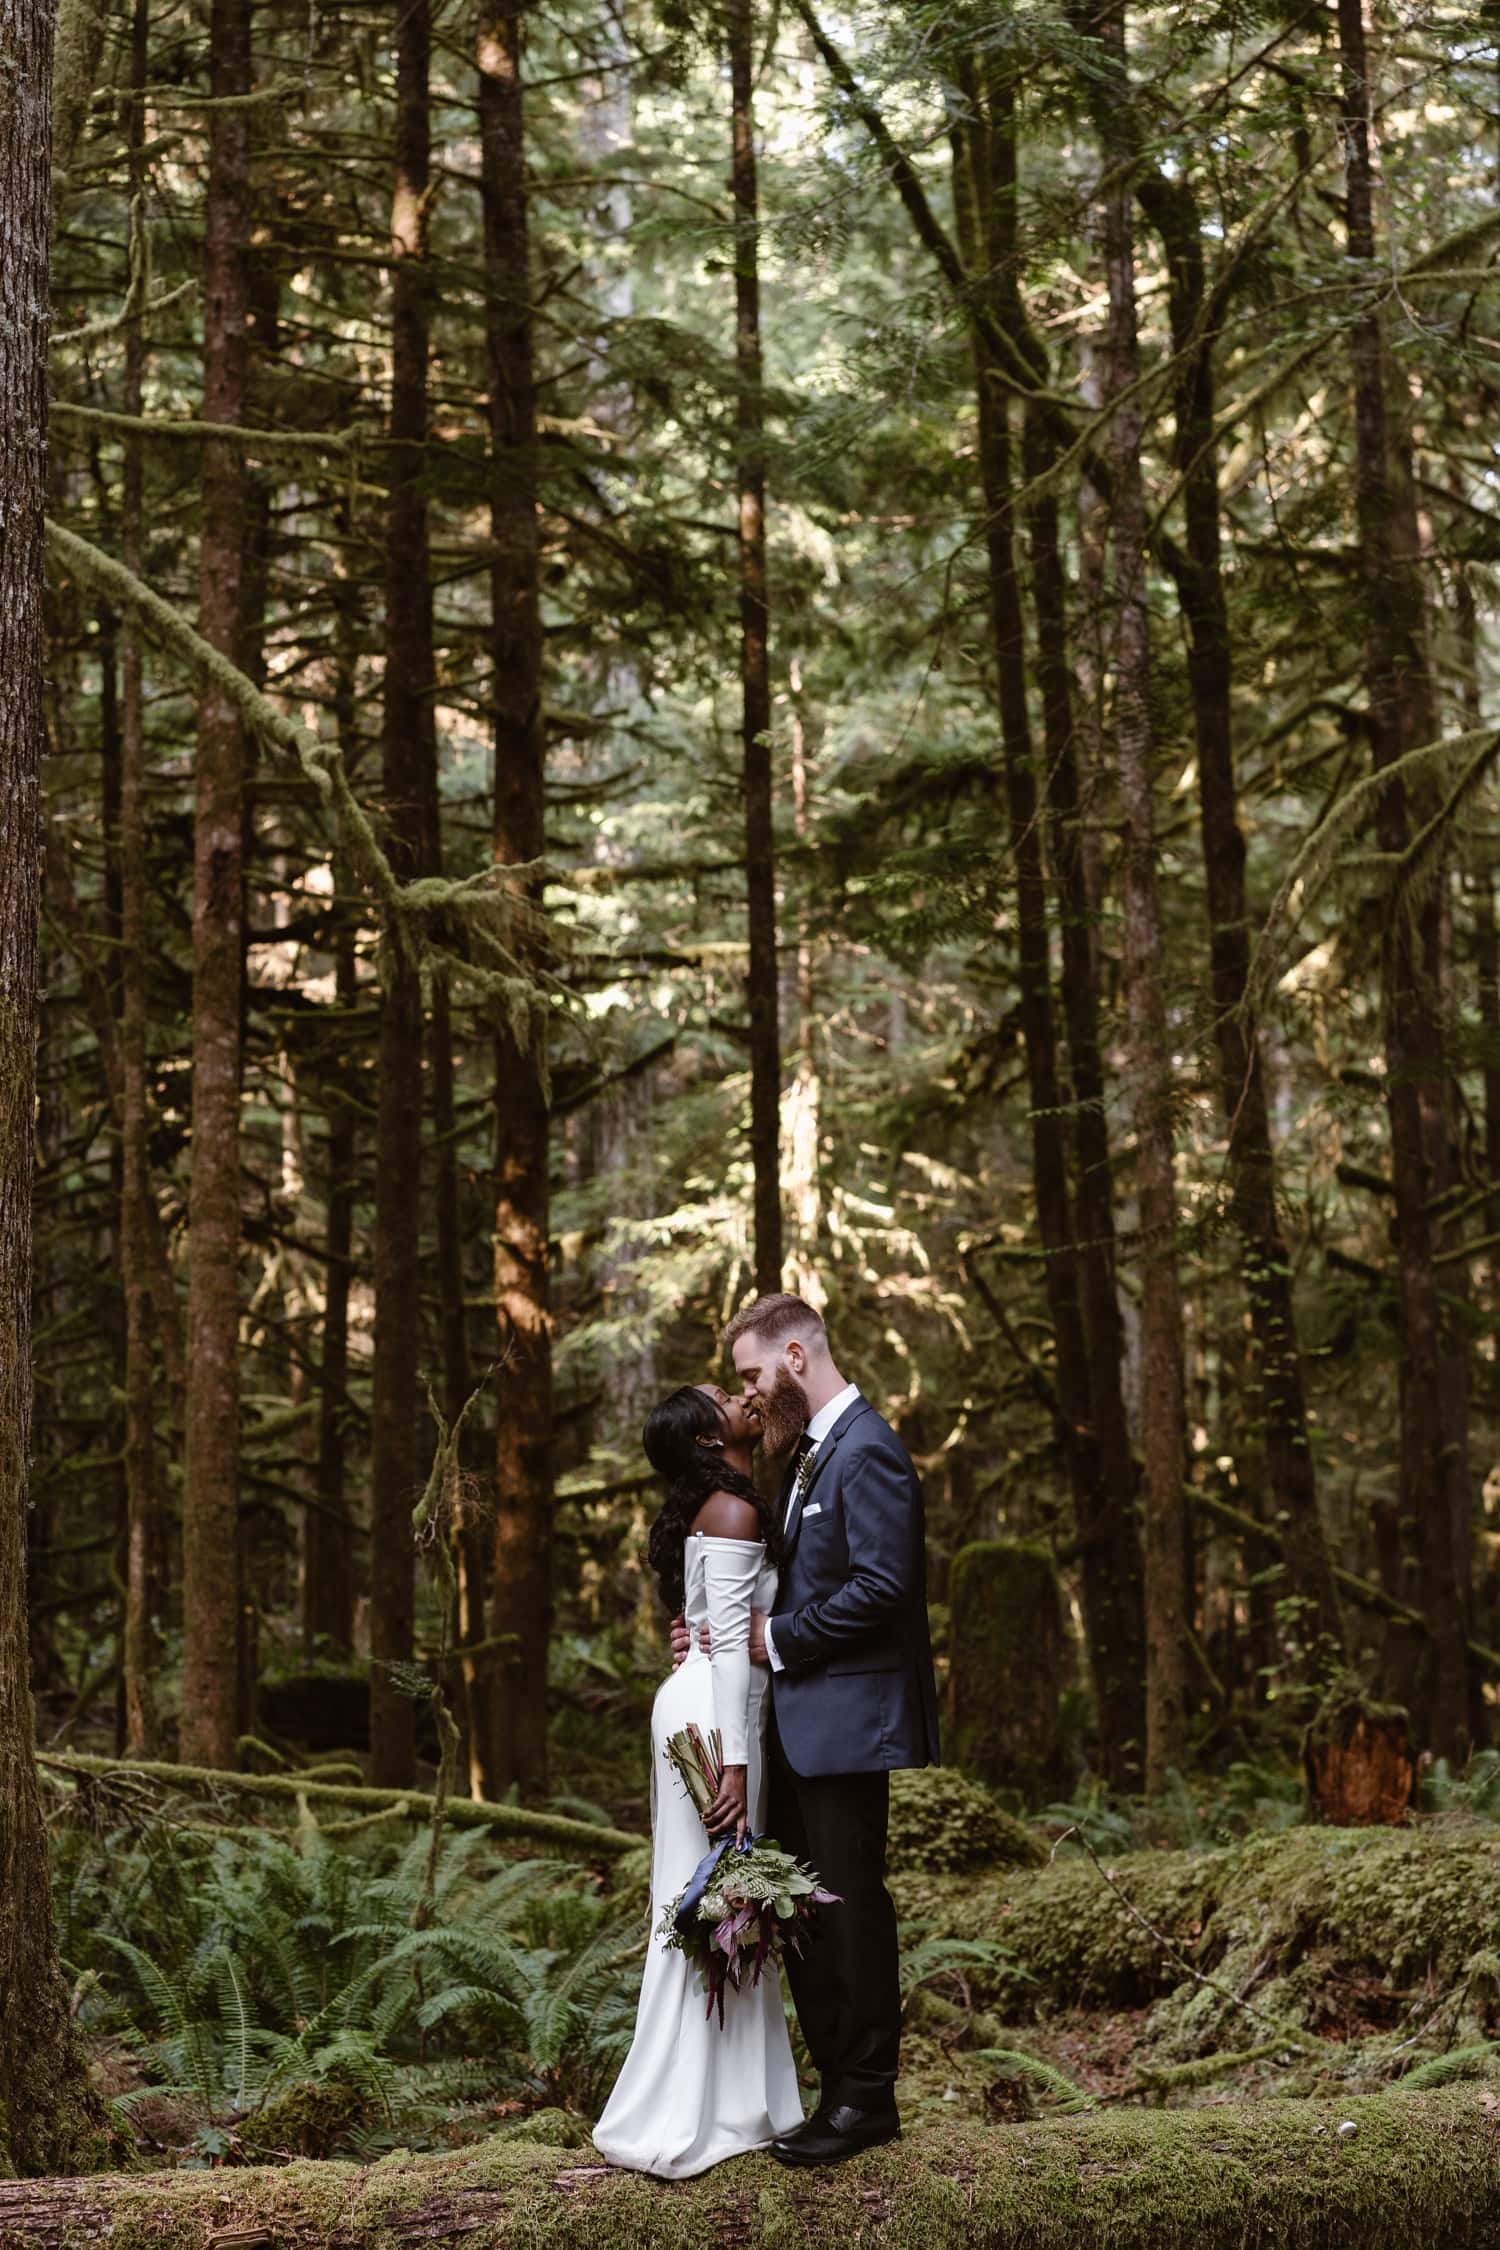 Olympic National Park Elopement + Package Info for 2020 | Vows and Peaks